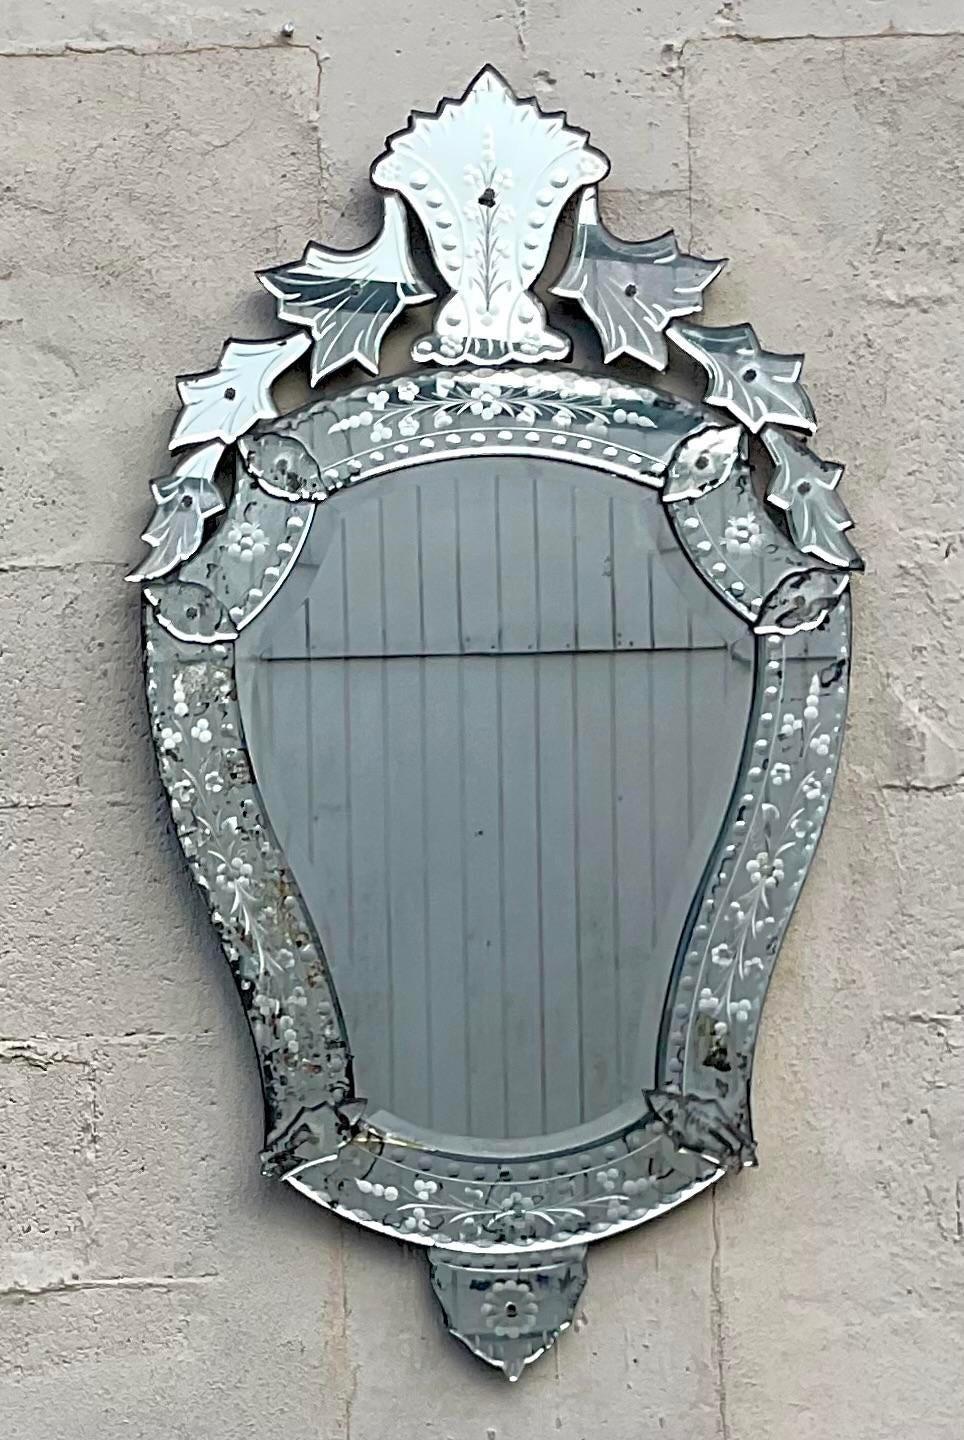 A fabulous vintage Regency wall mirror. A chic etched mirror in the classic Venetian style. An incredible all over patina from time with a distressed look to the glass. Perfect to add a flash of glamour to any space.